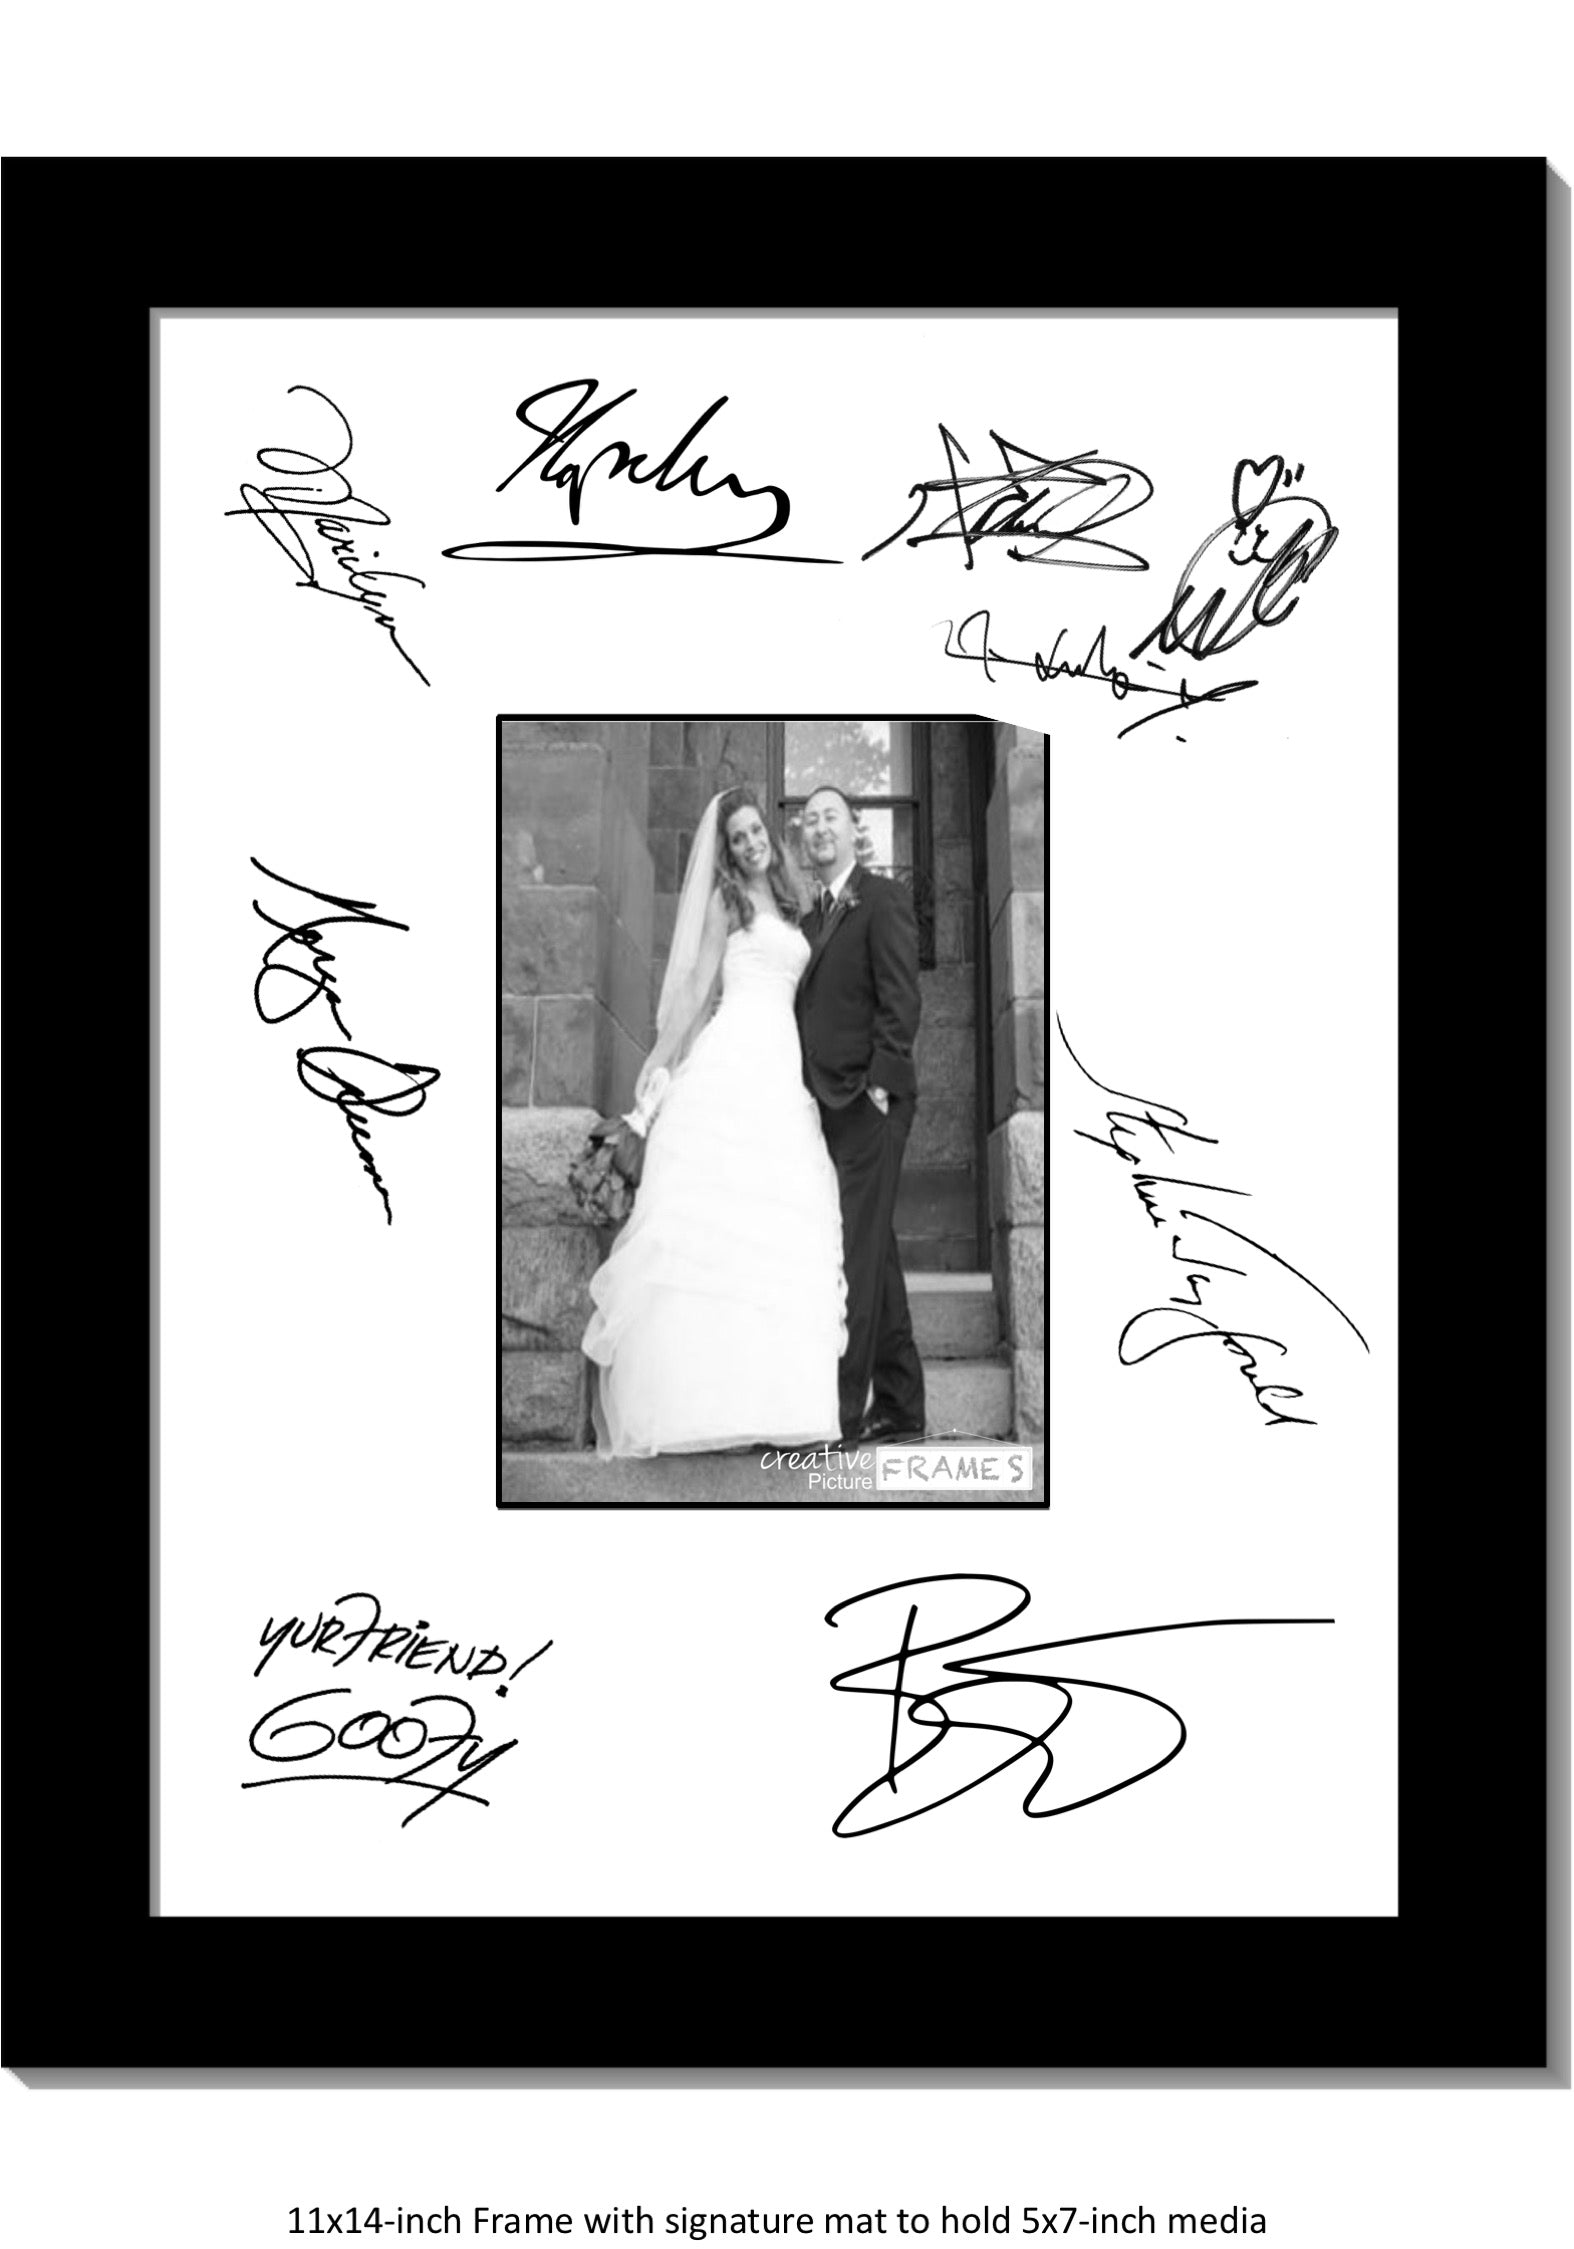 Signature Board 11x14 White Mat with 5x7 Photo Opening 